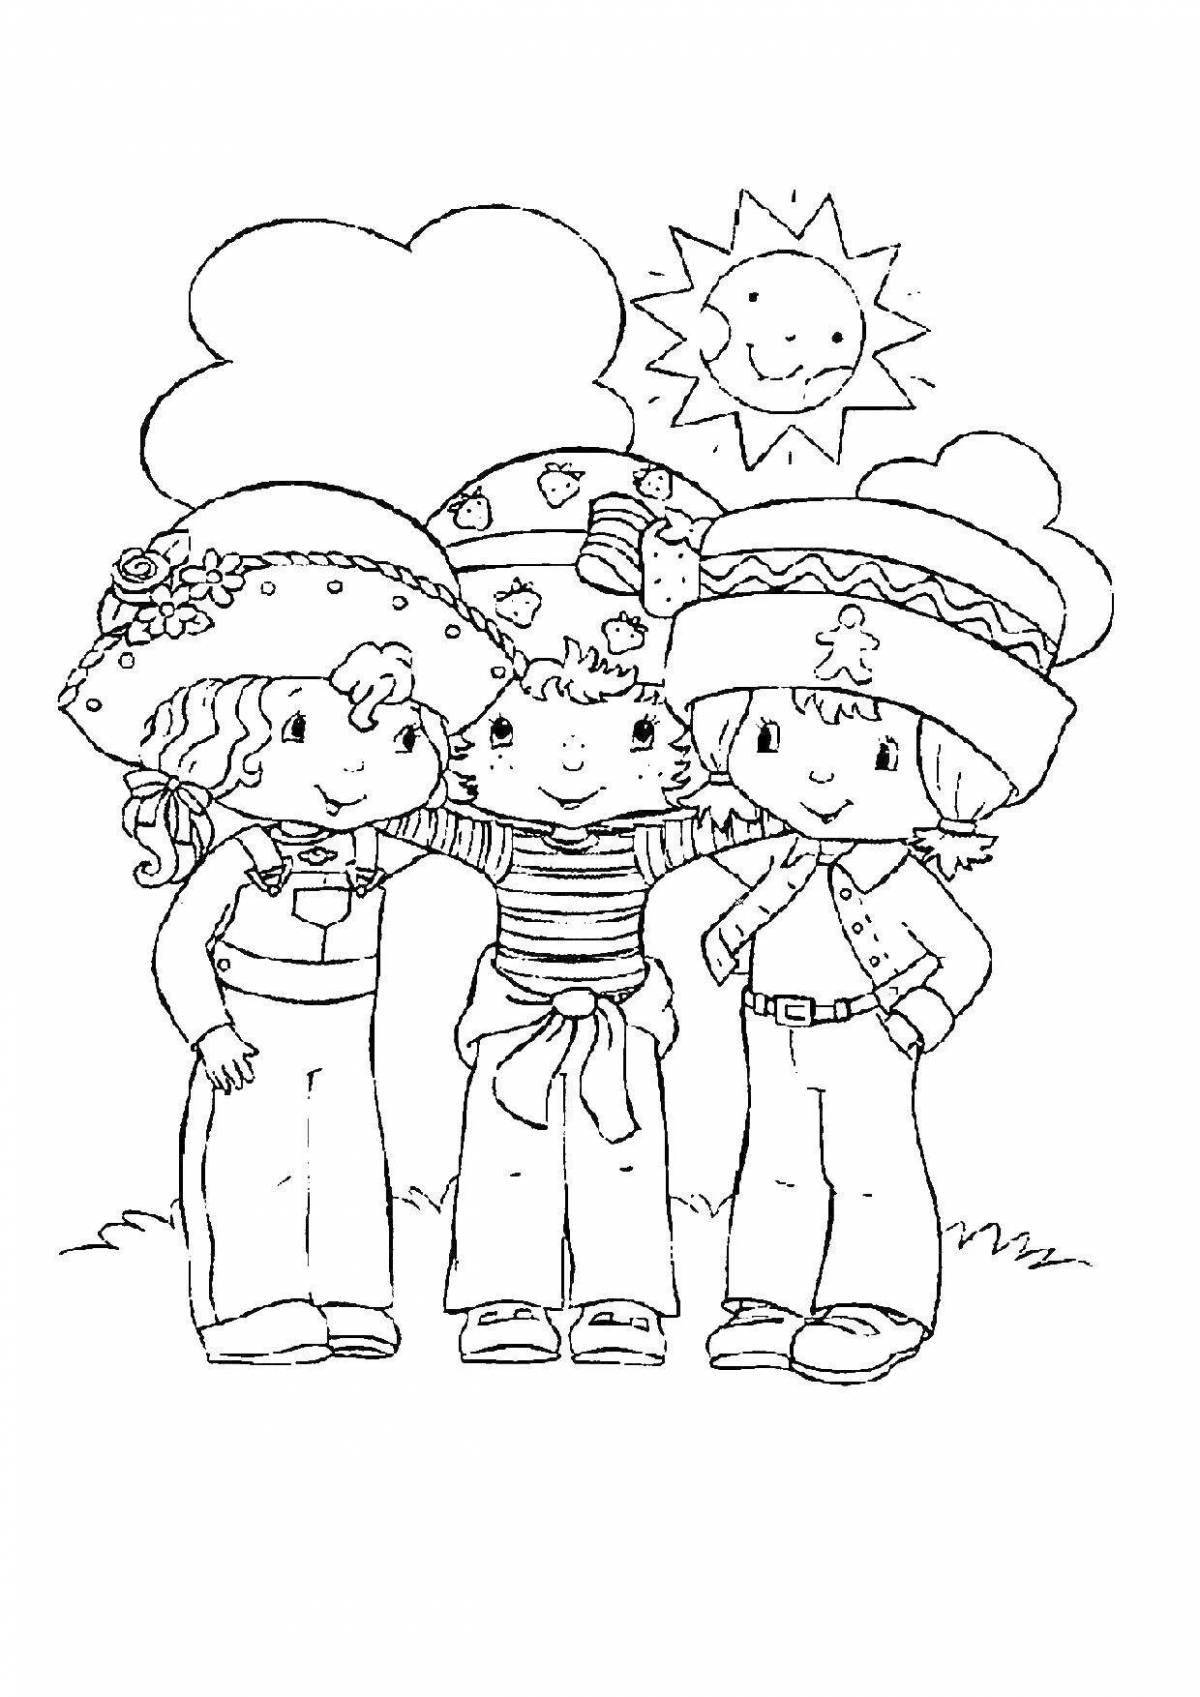 Cute friends coloring pages for kids